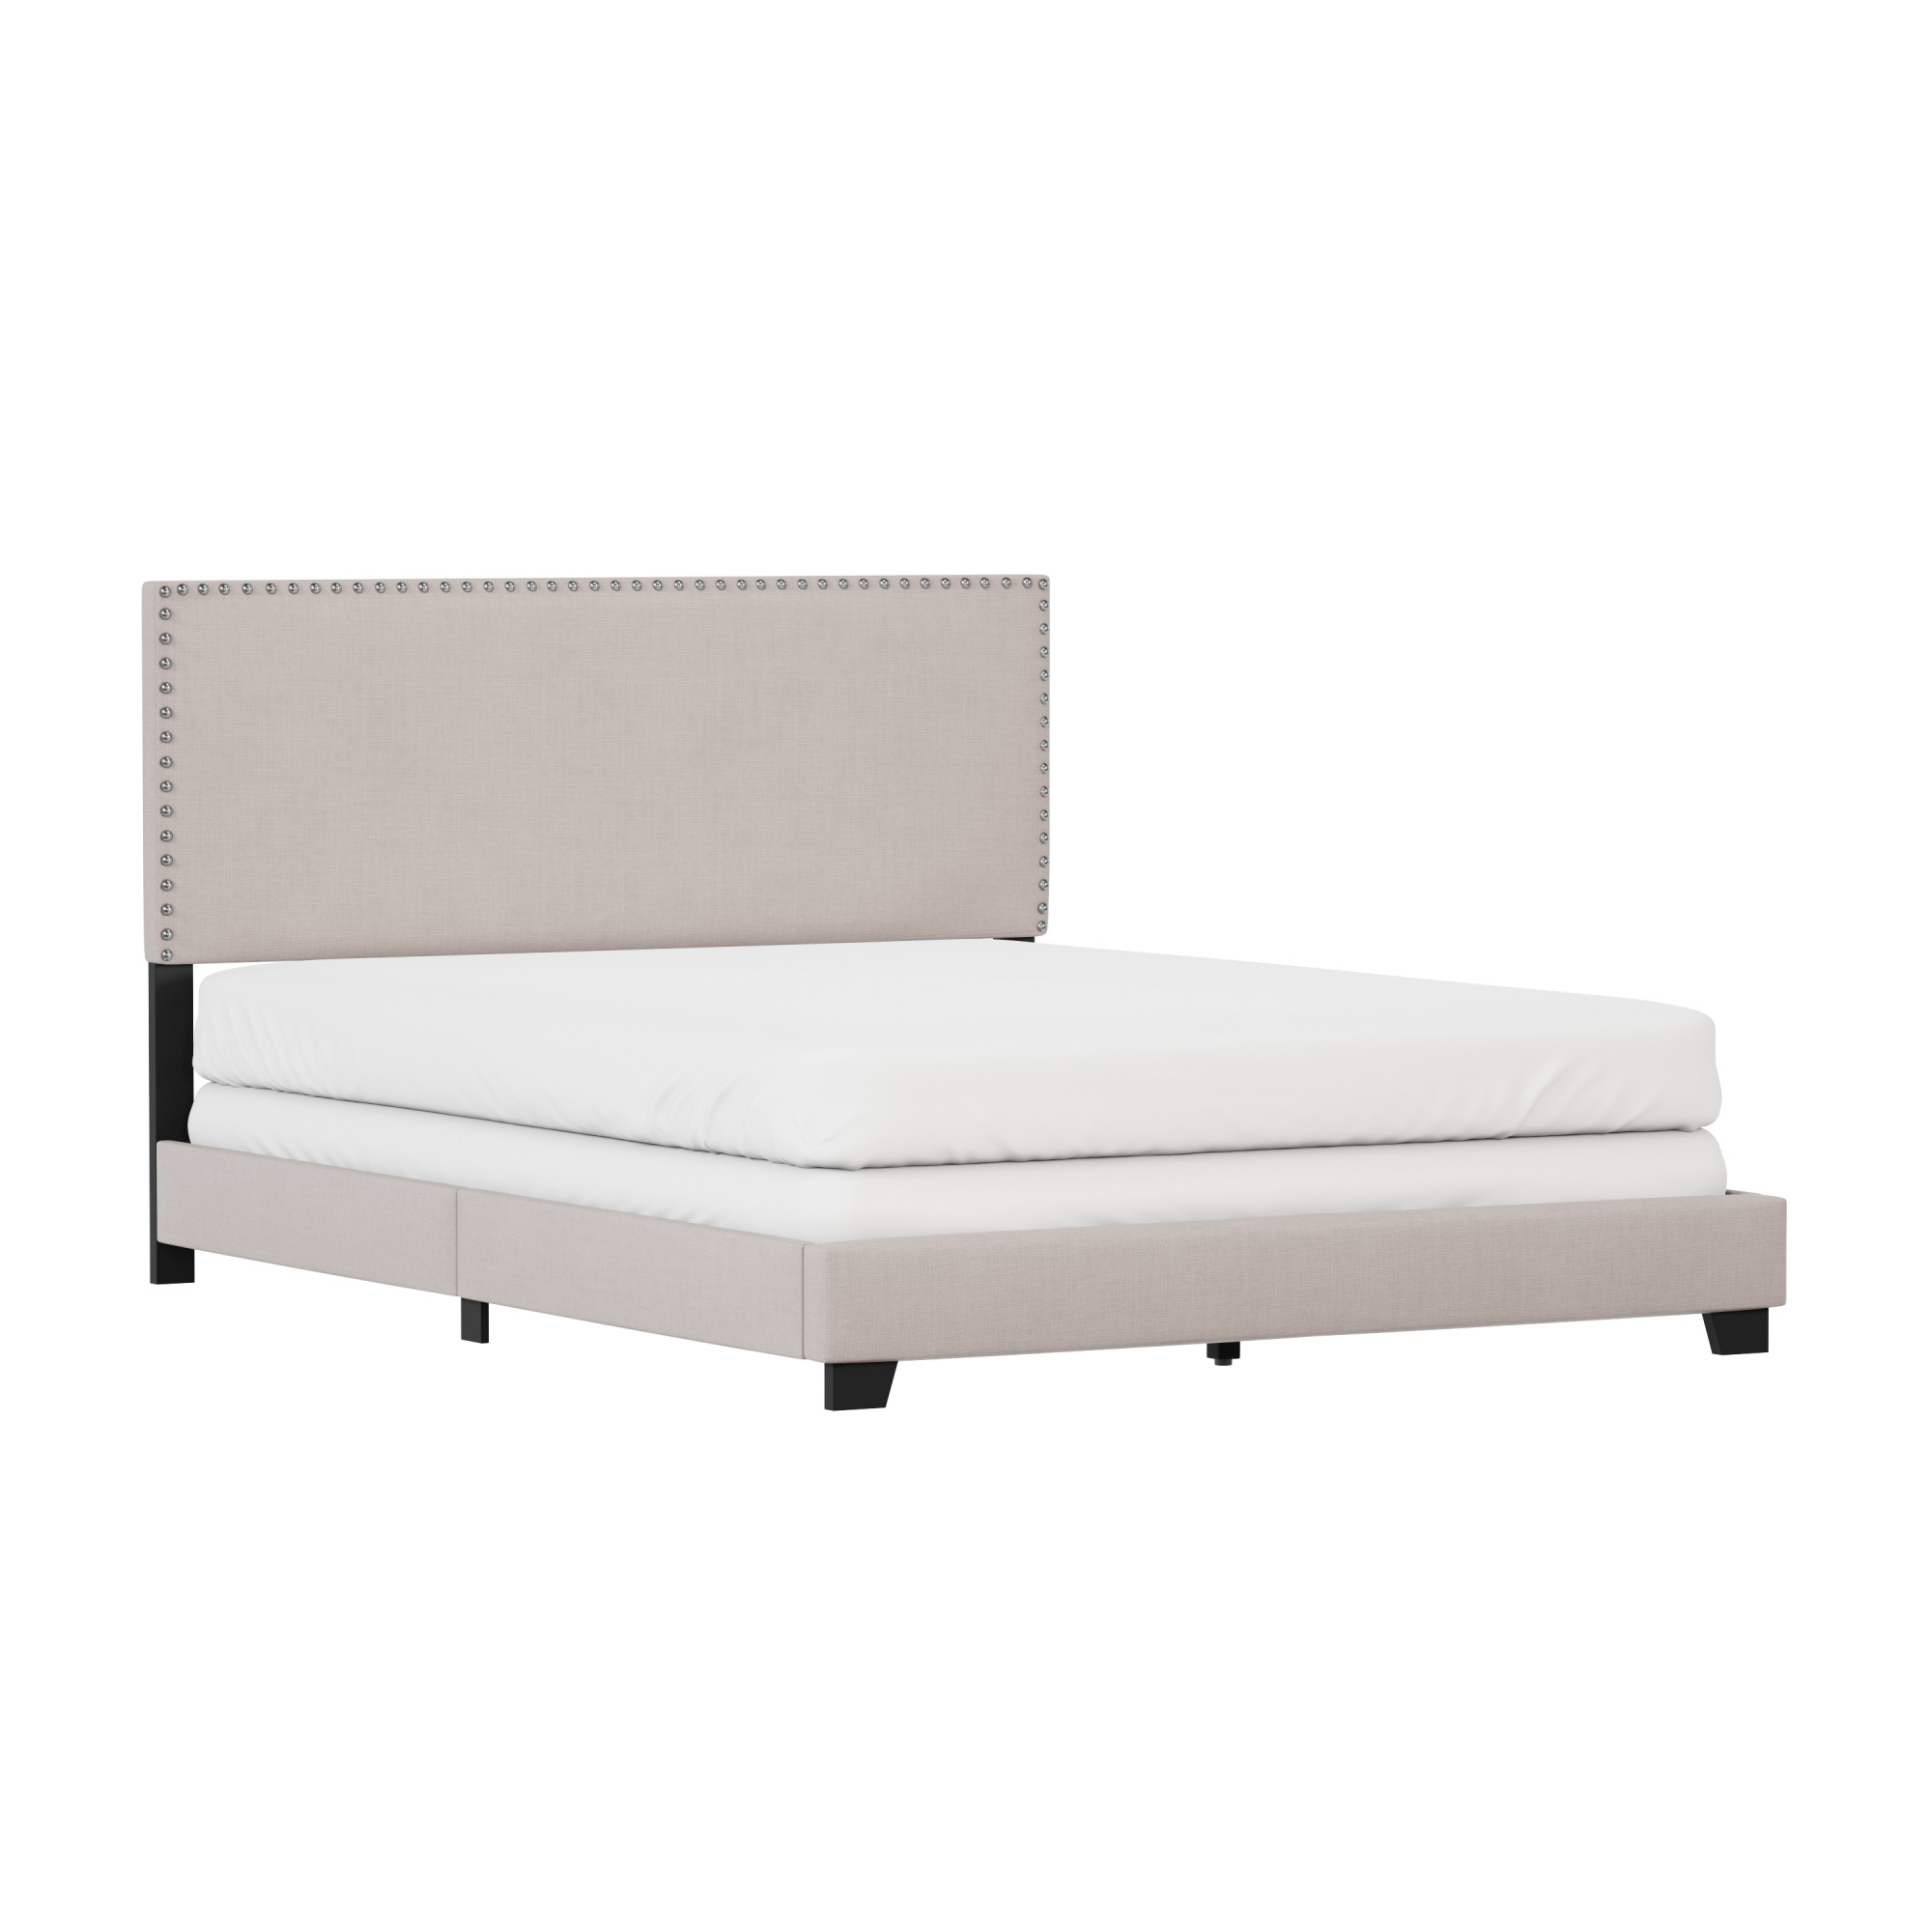 Willow Nailhead Trim Upholstered Queen Bed, Fog - image 9 of 16